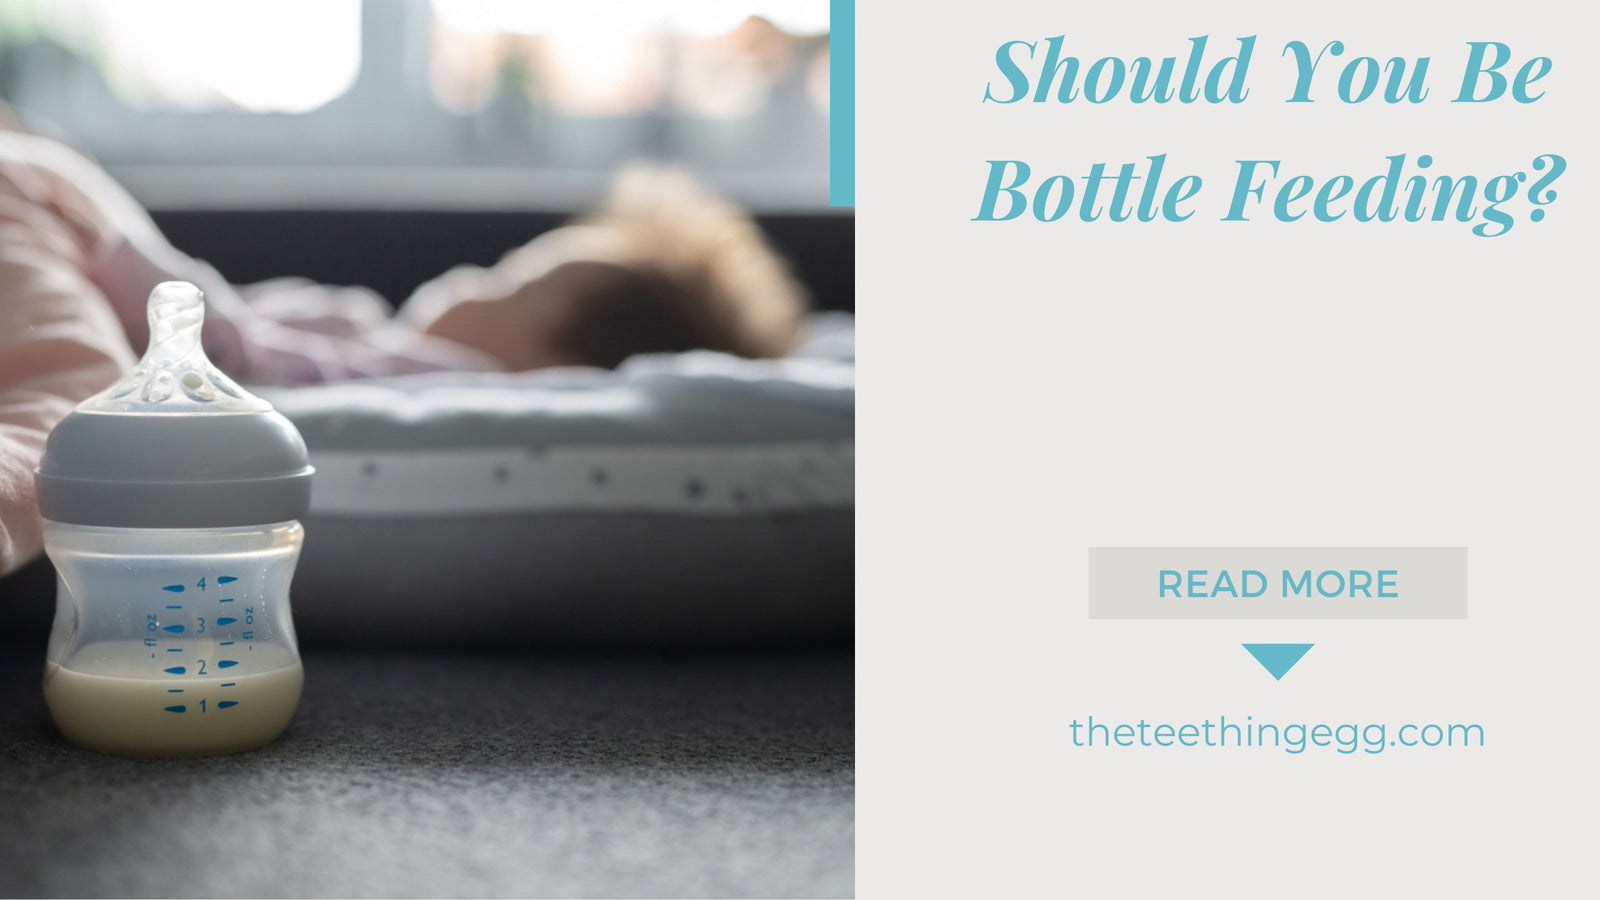 How to Switch from Breastfeeding to Bottle-feeding